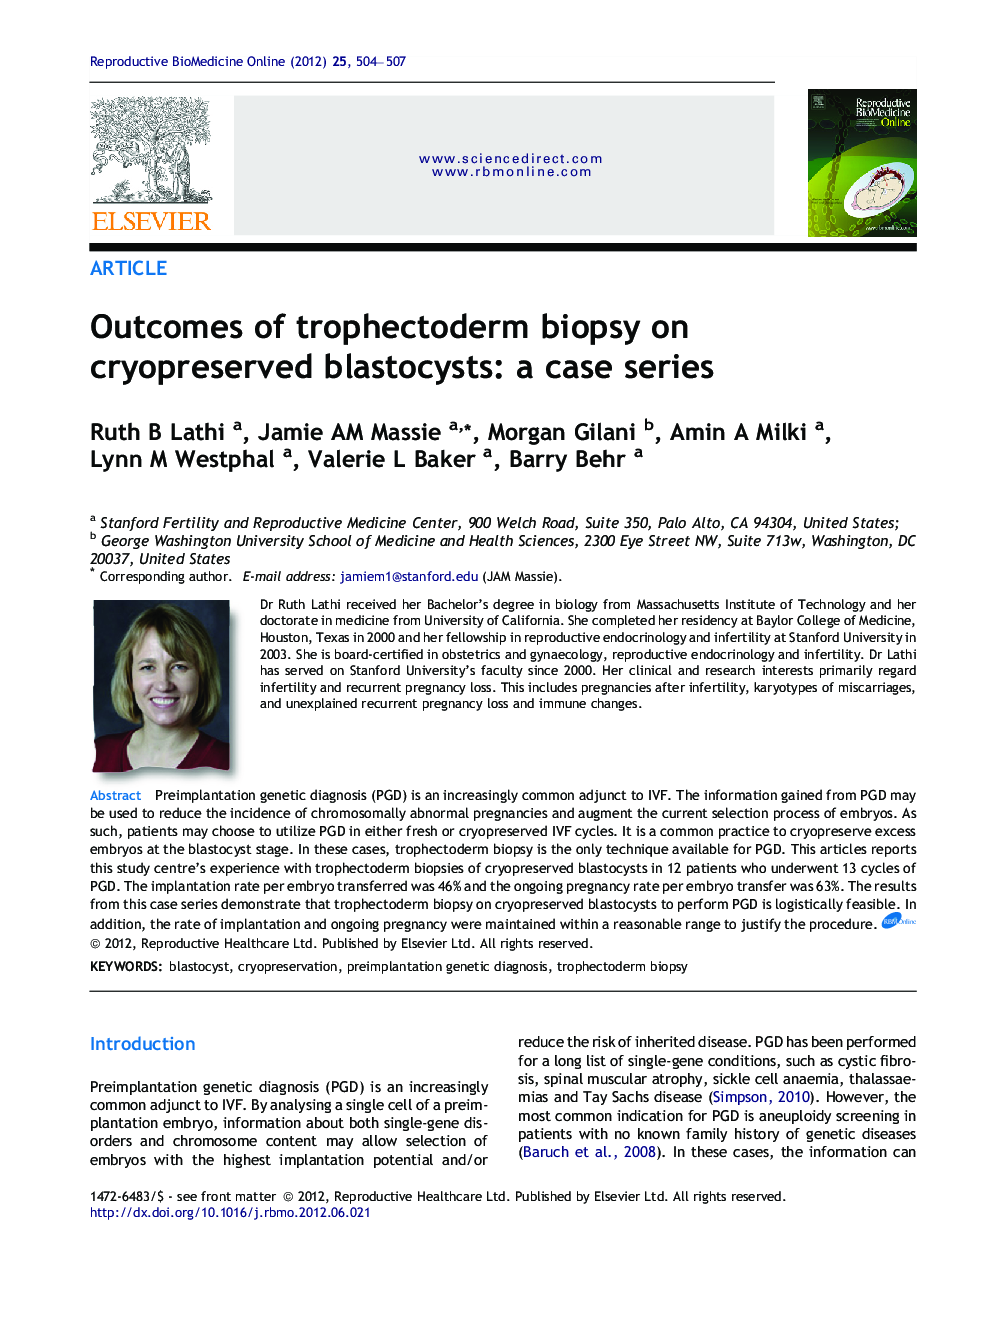 Outcomes of trophectoderm biopsy on cryopreserved blastocysts: a case series 